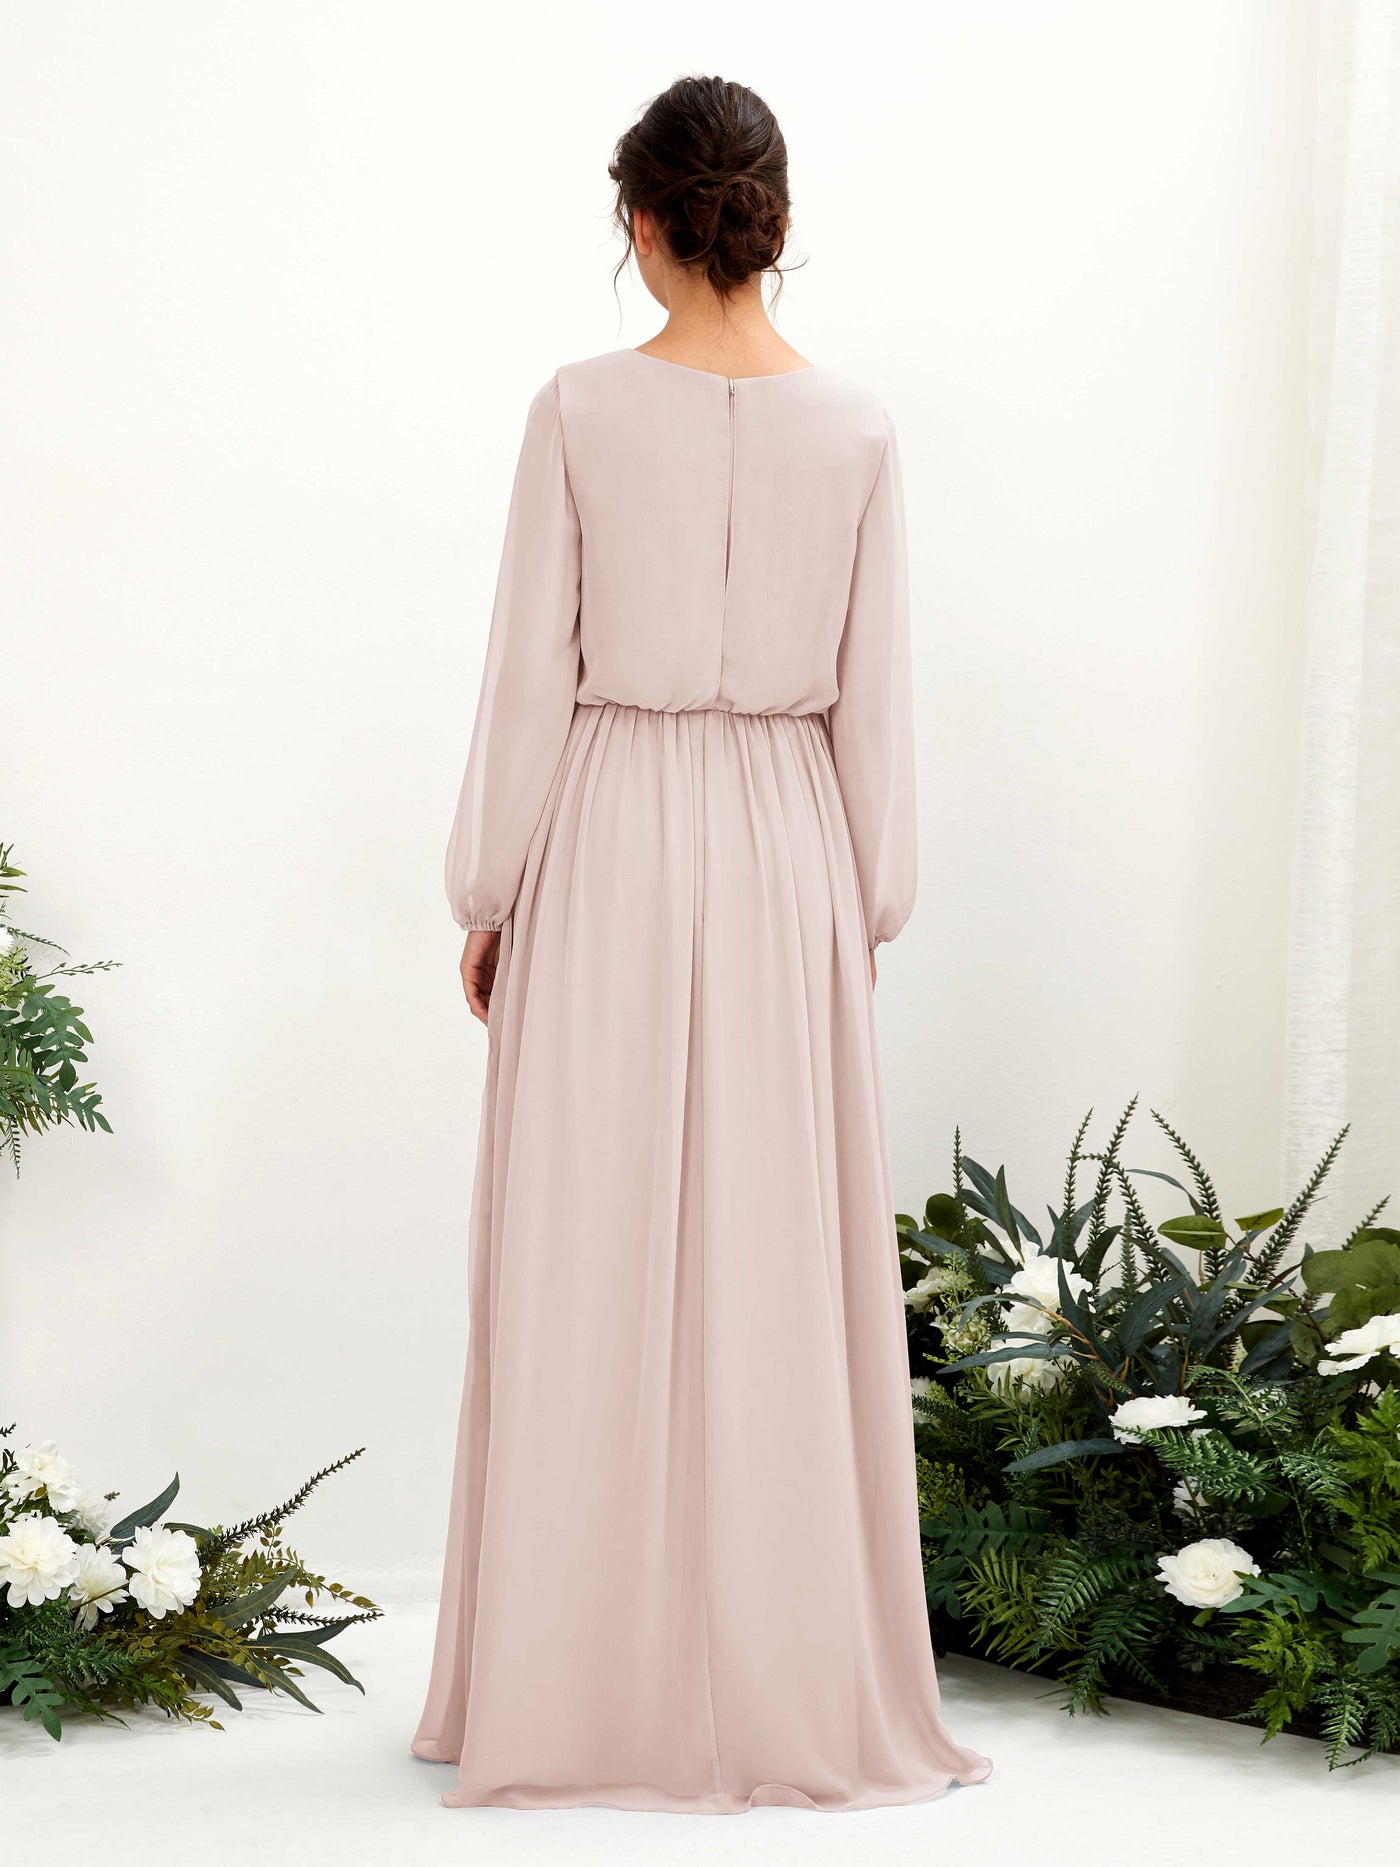 Biscotti Bridesmaid Dresses Bridesmaid Dress A-line Chiffon V-neck Full Length Long Sleeves Wedding Party Dress (81223835)#color_biscotti